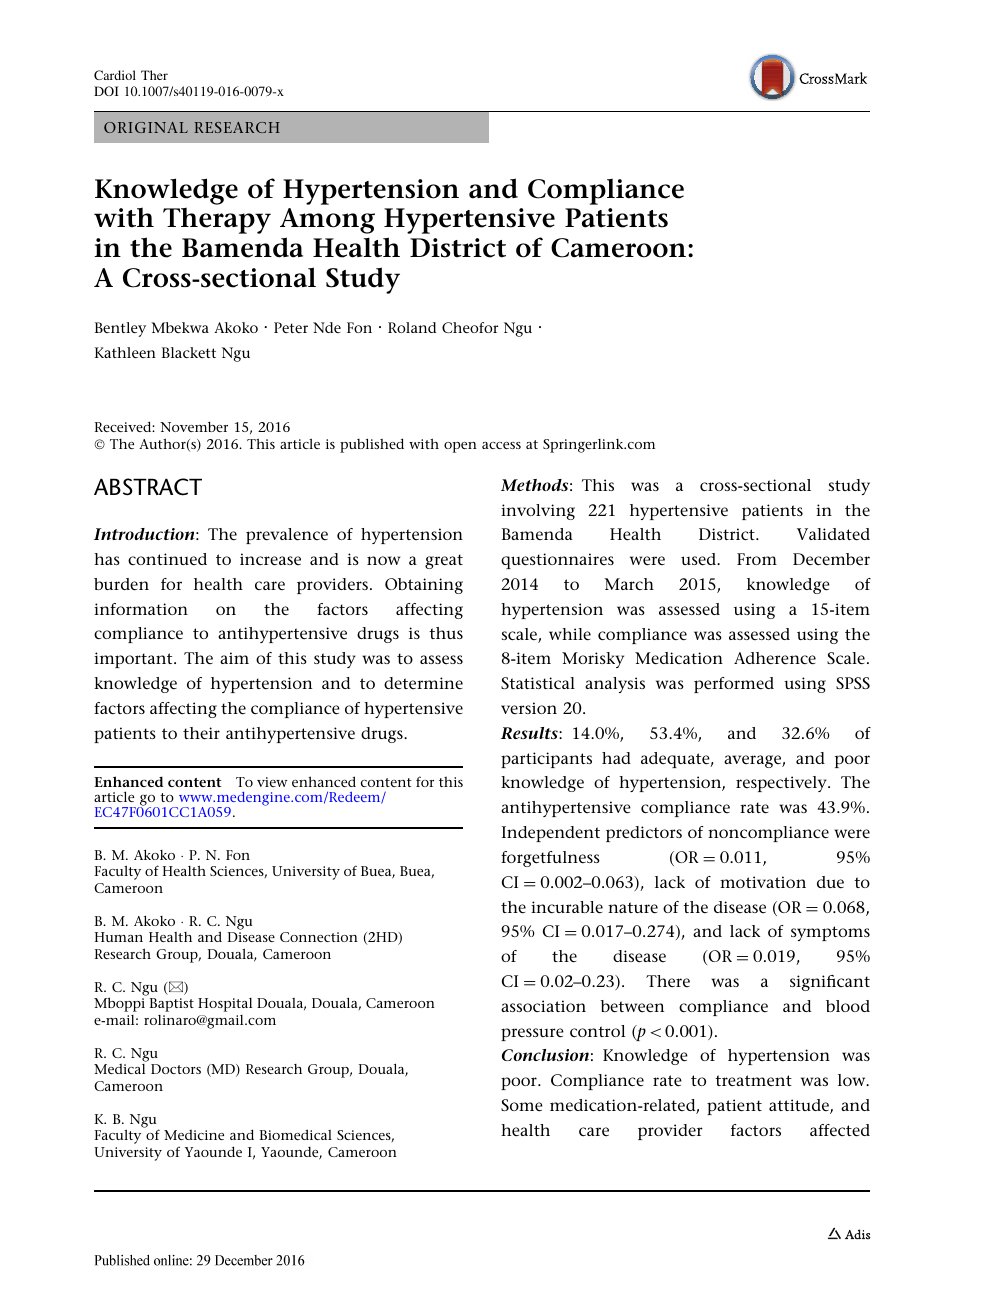 Knowledge Of Hypertension And Compliance With Therapy Among Hypertensive Patients In The Bamenda Health District Of Cameroon A Cross Sectional Study Topic Of Research Paper In Clinical Medicine Download Scholarly Article Pdf